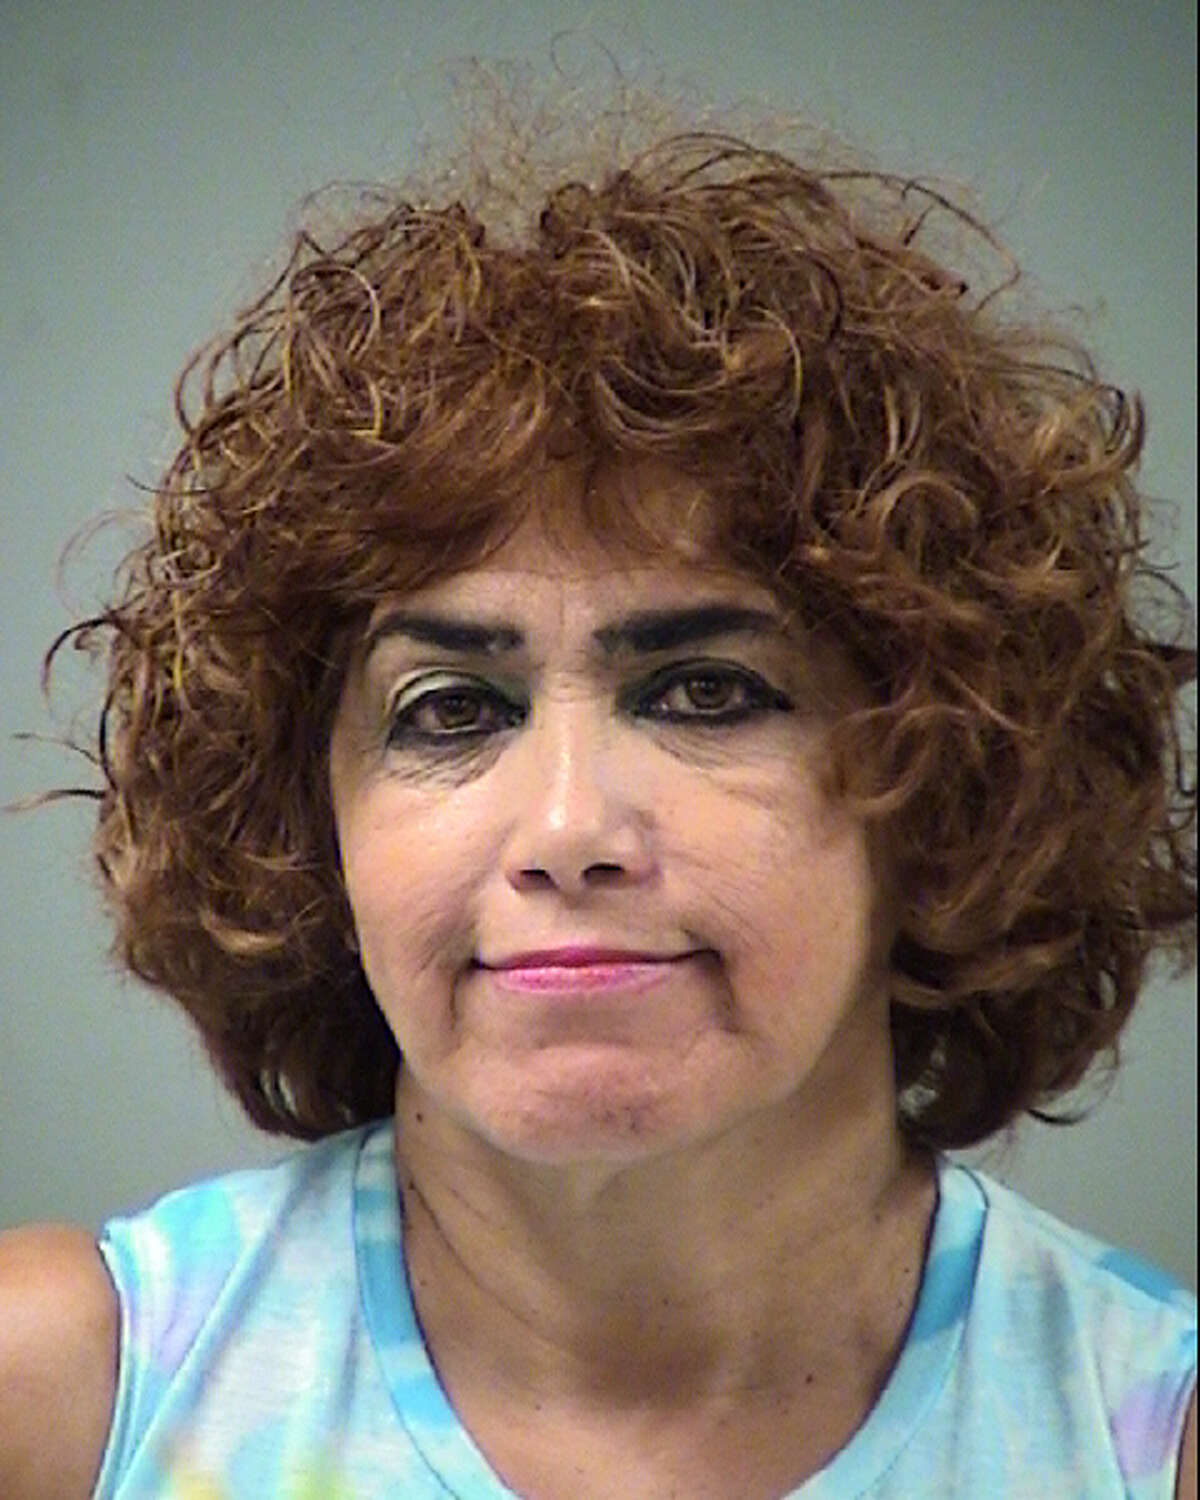 Margie Hernandez Miranda, 61, was arrested on suspicion of driving while intoxicated.